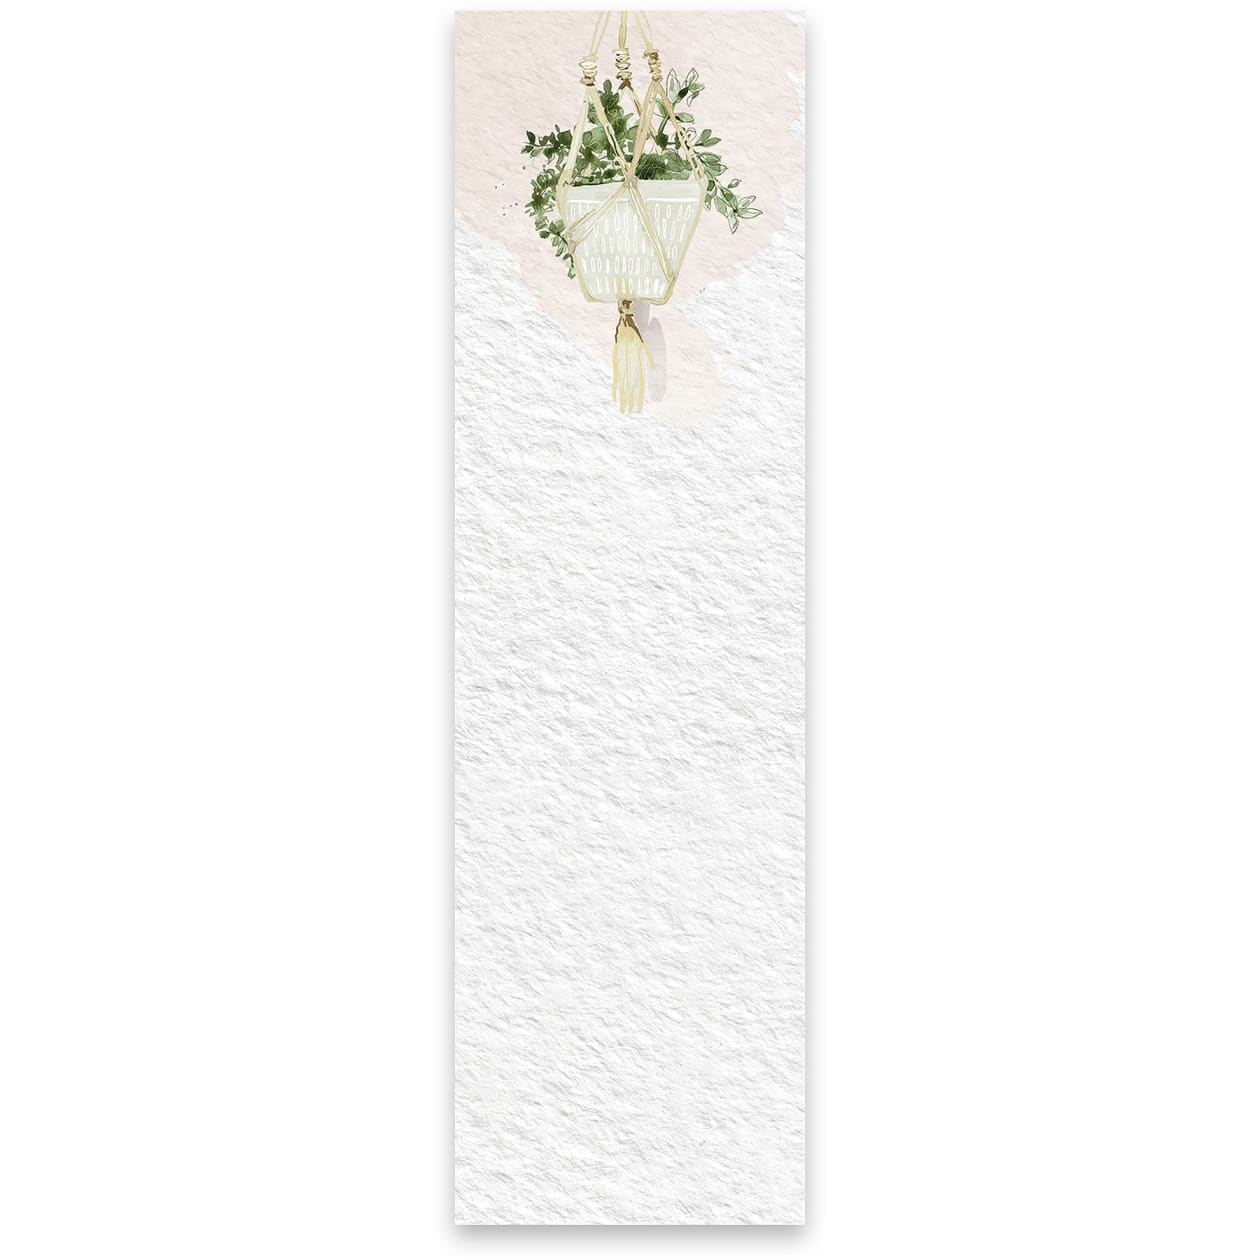 Hanging Plant List Notepad | 9.5" x 2.75" | Holds to Fridge with Strong Magnet